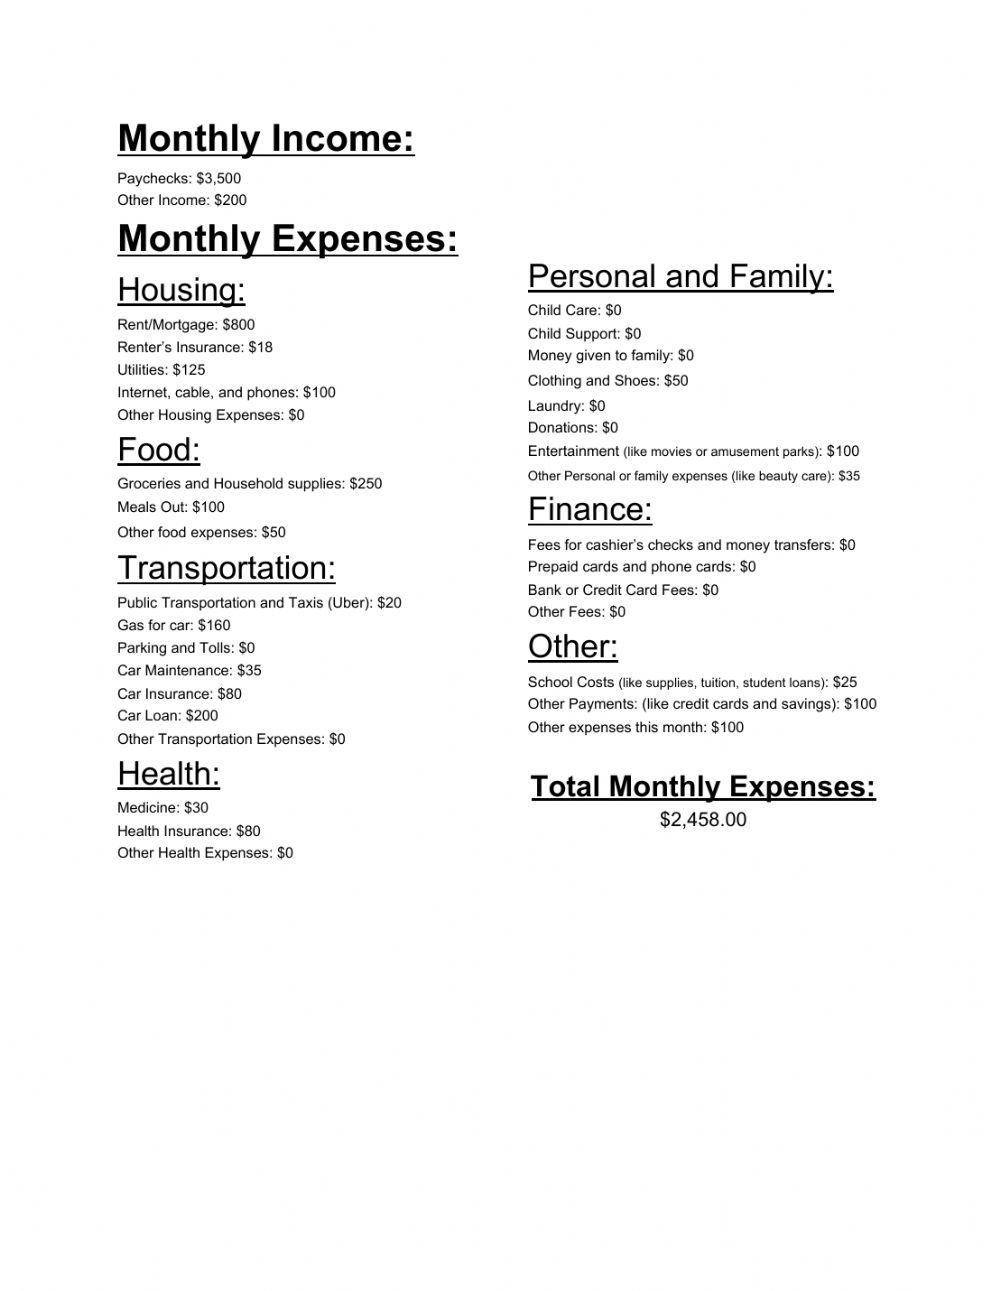 Monthly Budget Sheet with Guide (2)